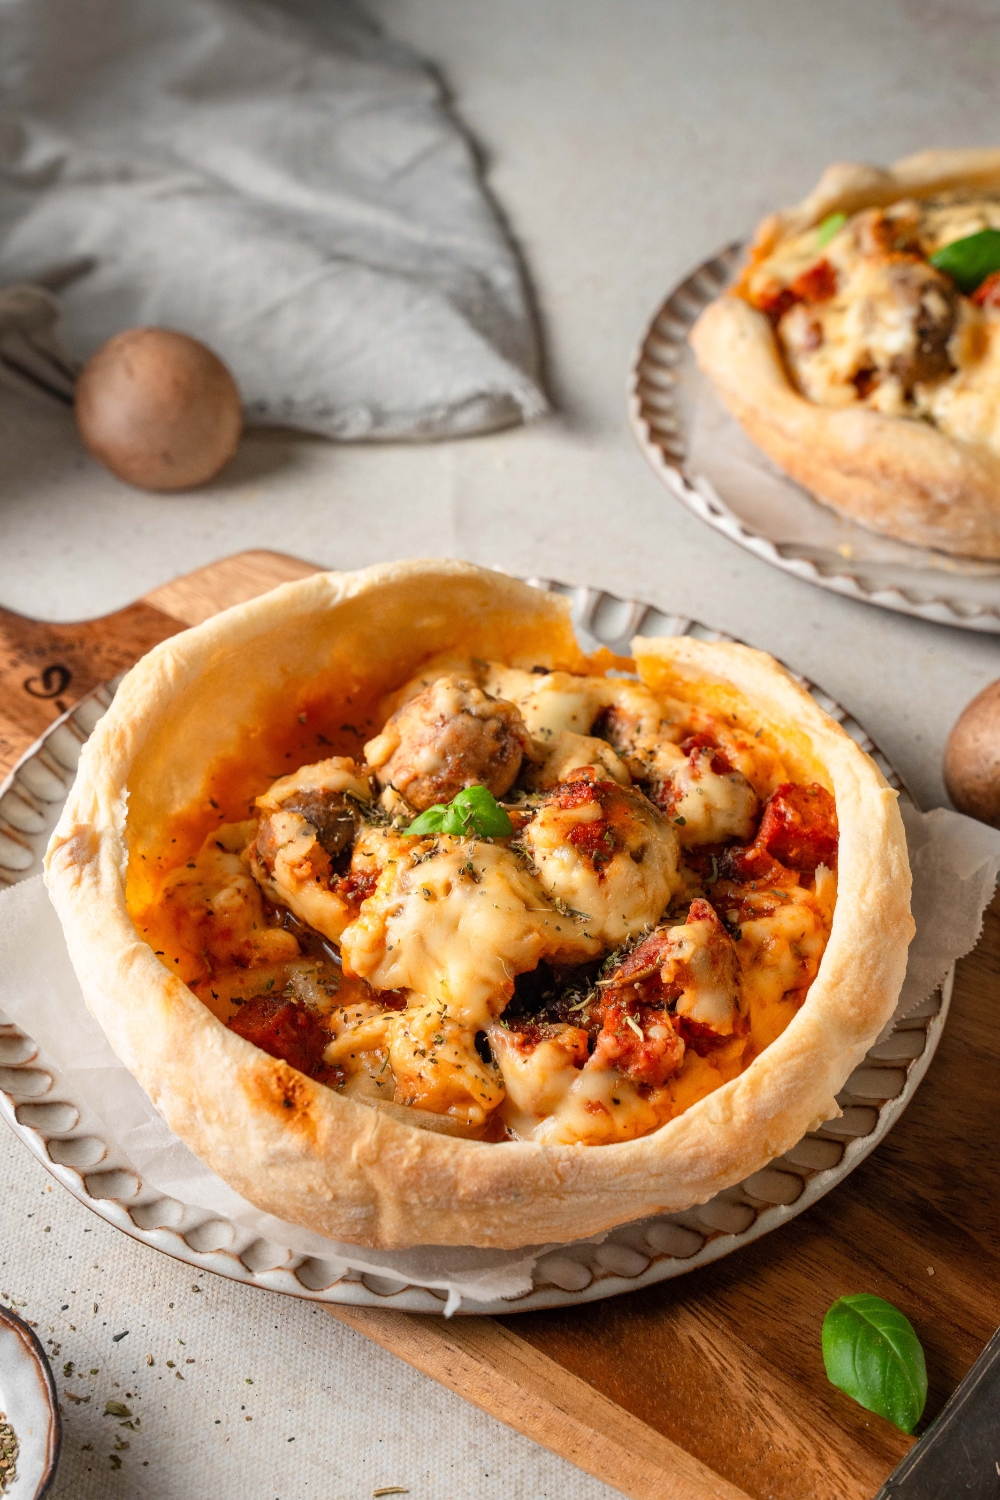 A baked Chicago pizza pot pie sits on a plate. The cheese has melted over the mushrooms.